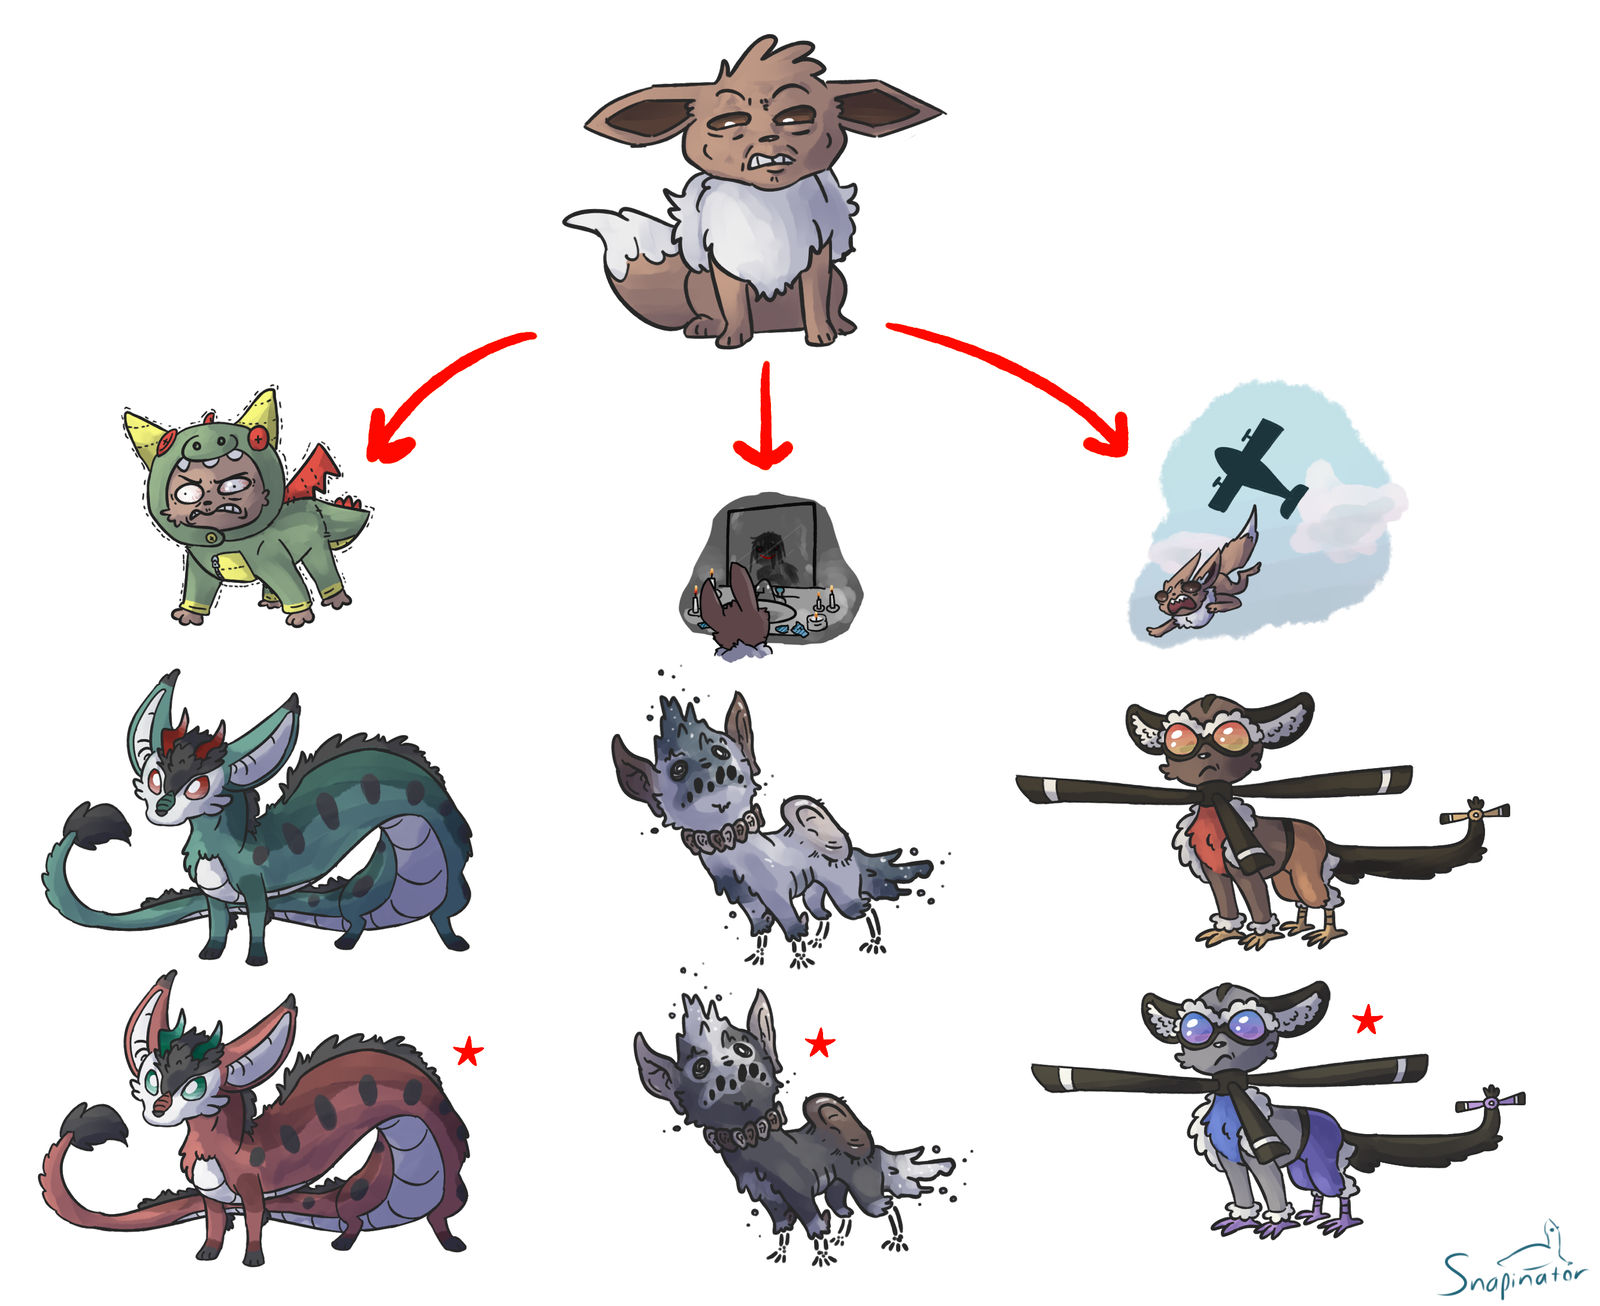 these are probably all the eeveelutions  Pokemon eevee evolutions, Eevee  evolutions, Pokemon eeveelutions